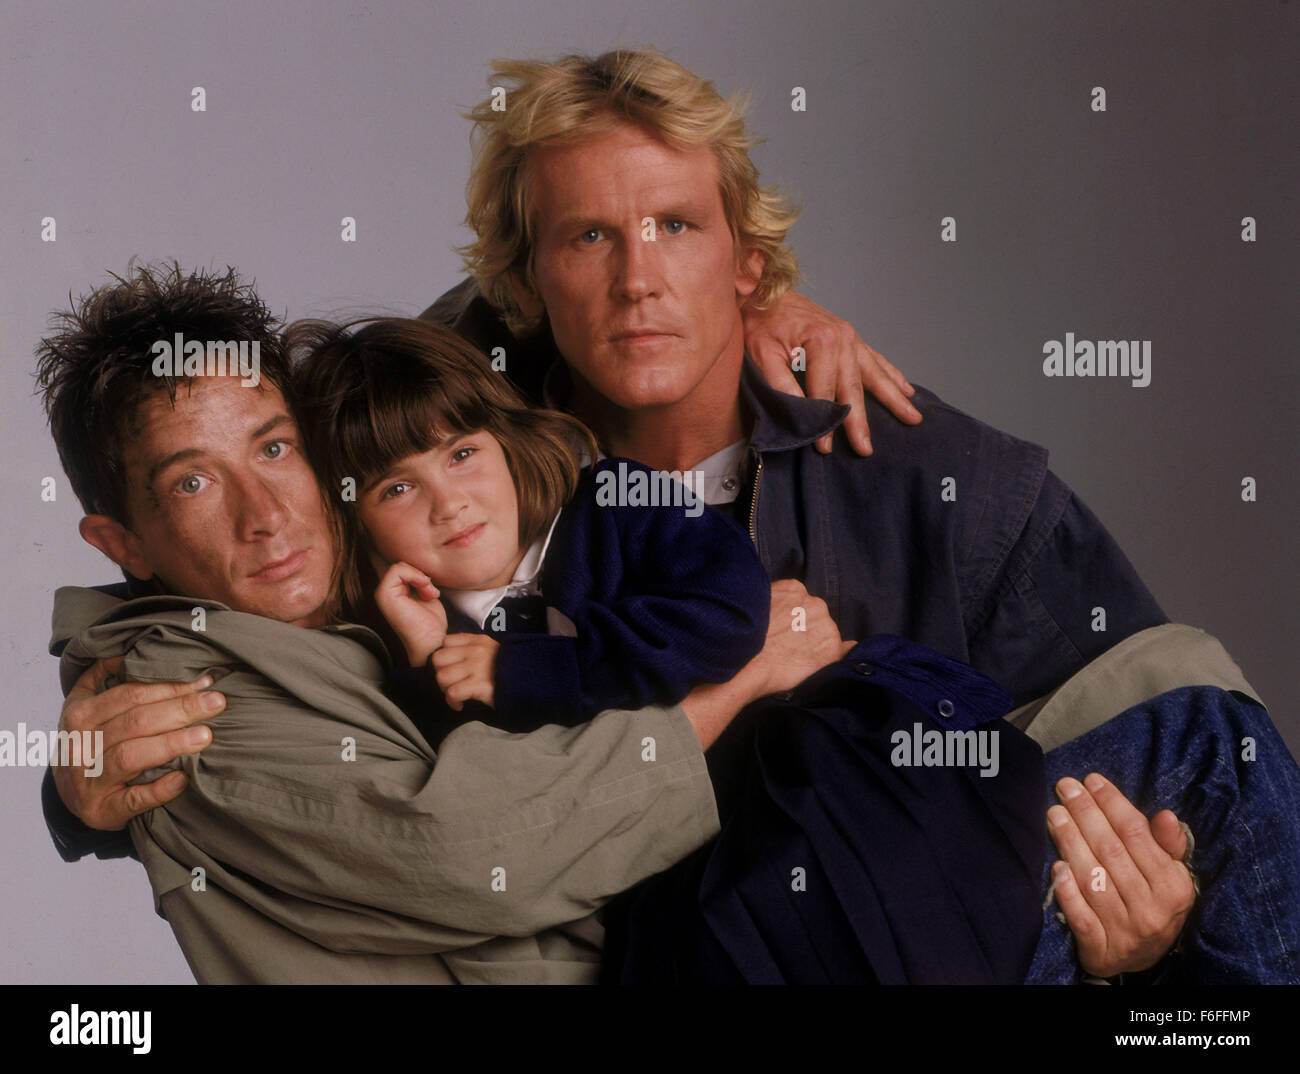 Jan 27, 1989; Los Angeles, CA, USA; MARTIN SHORT, SARAH ROWLAND DOROFF and NICK NOLTE star as Perry, Meg and Lucas in the action/comedy 'Three Fugitives' directed by Francis Veber. Stock Photo